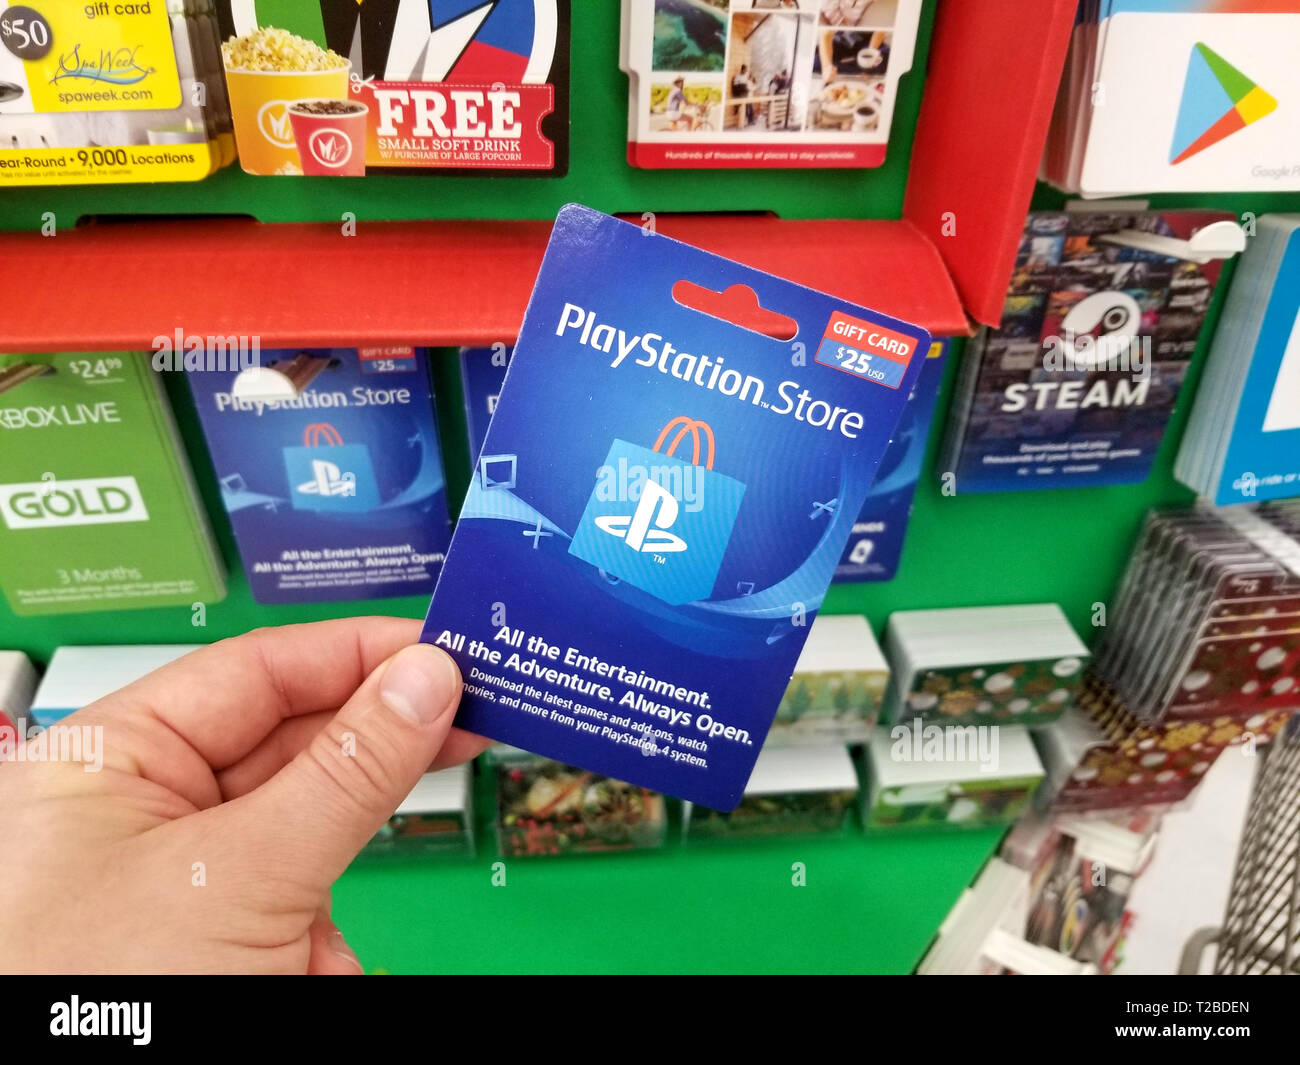 PLATTSBURGH, USA - JANUARY 21, 2019 : Play Station gift card in a hand over a shelves with different giftcards in a Walmart store. Stock Photo